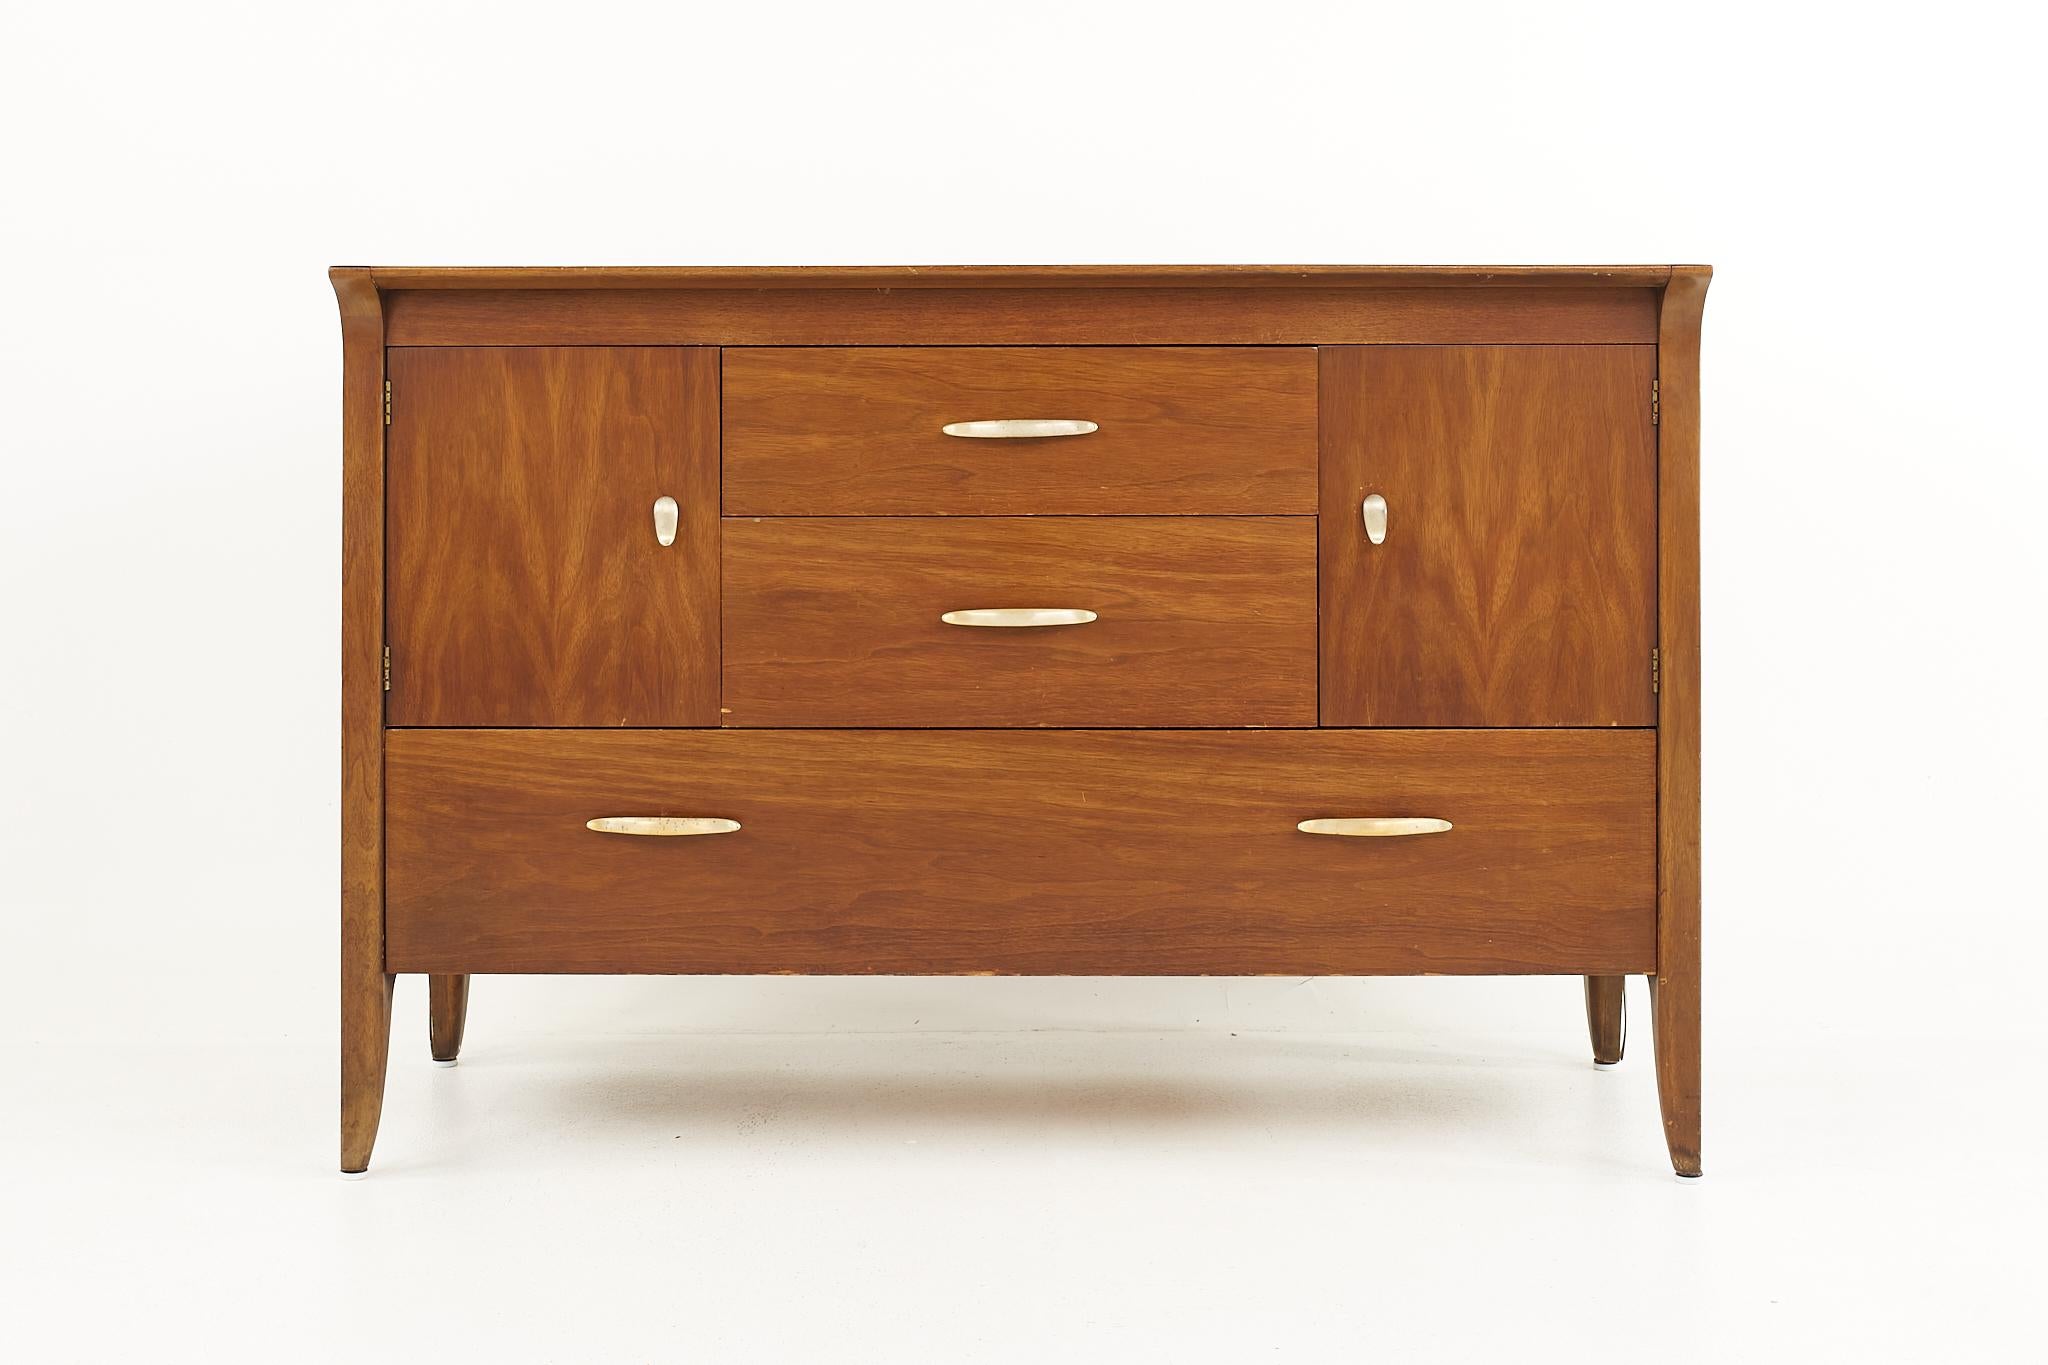 John Van Koert for Drexel profile mid century sideboard Credenza

This credenza measures: 48 wide x 21 deep x 32 inches high

All pieces of furniture can be had in what we call restored vintage condition. That means the piece is restored upon